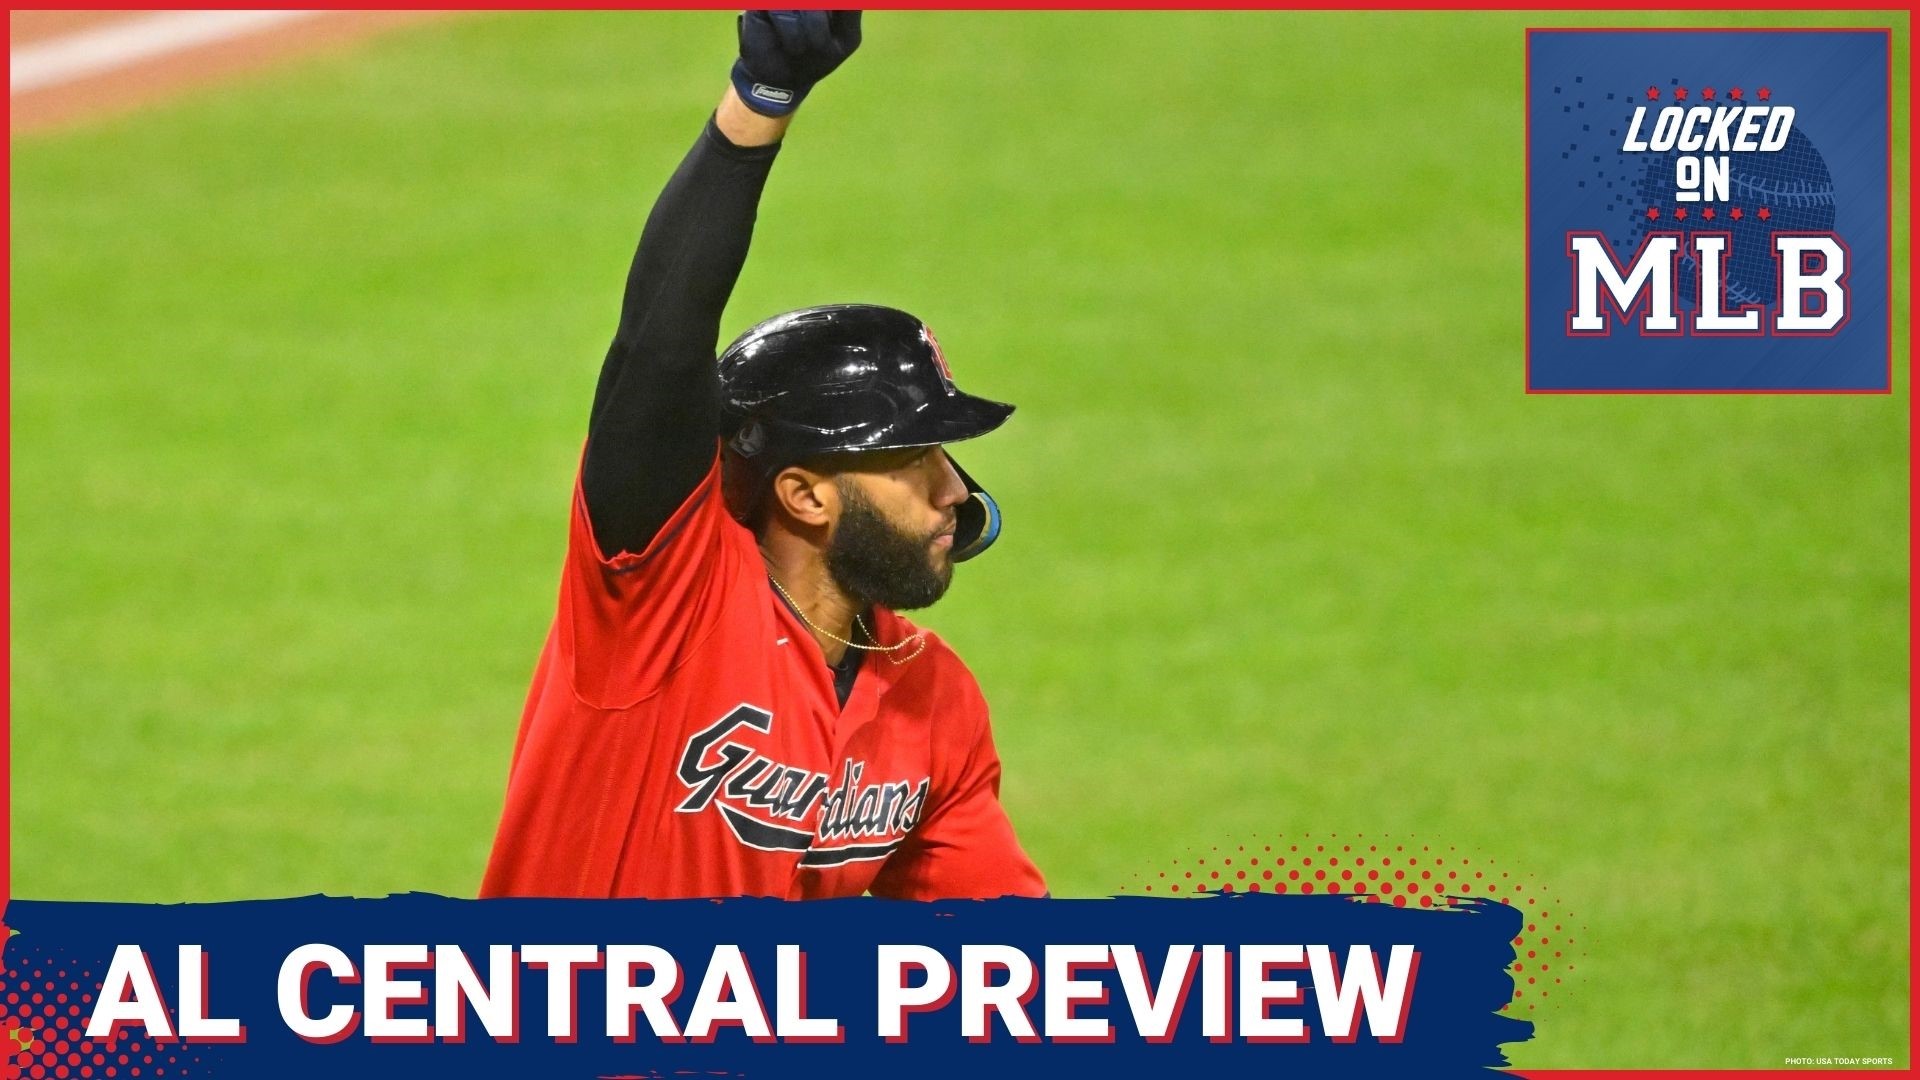 A special edition of Lock On MLB previewing the AL Central division for the upcoming 2023 season. The teams to watch and who could win it all.